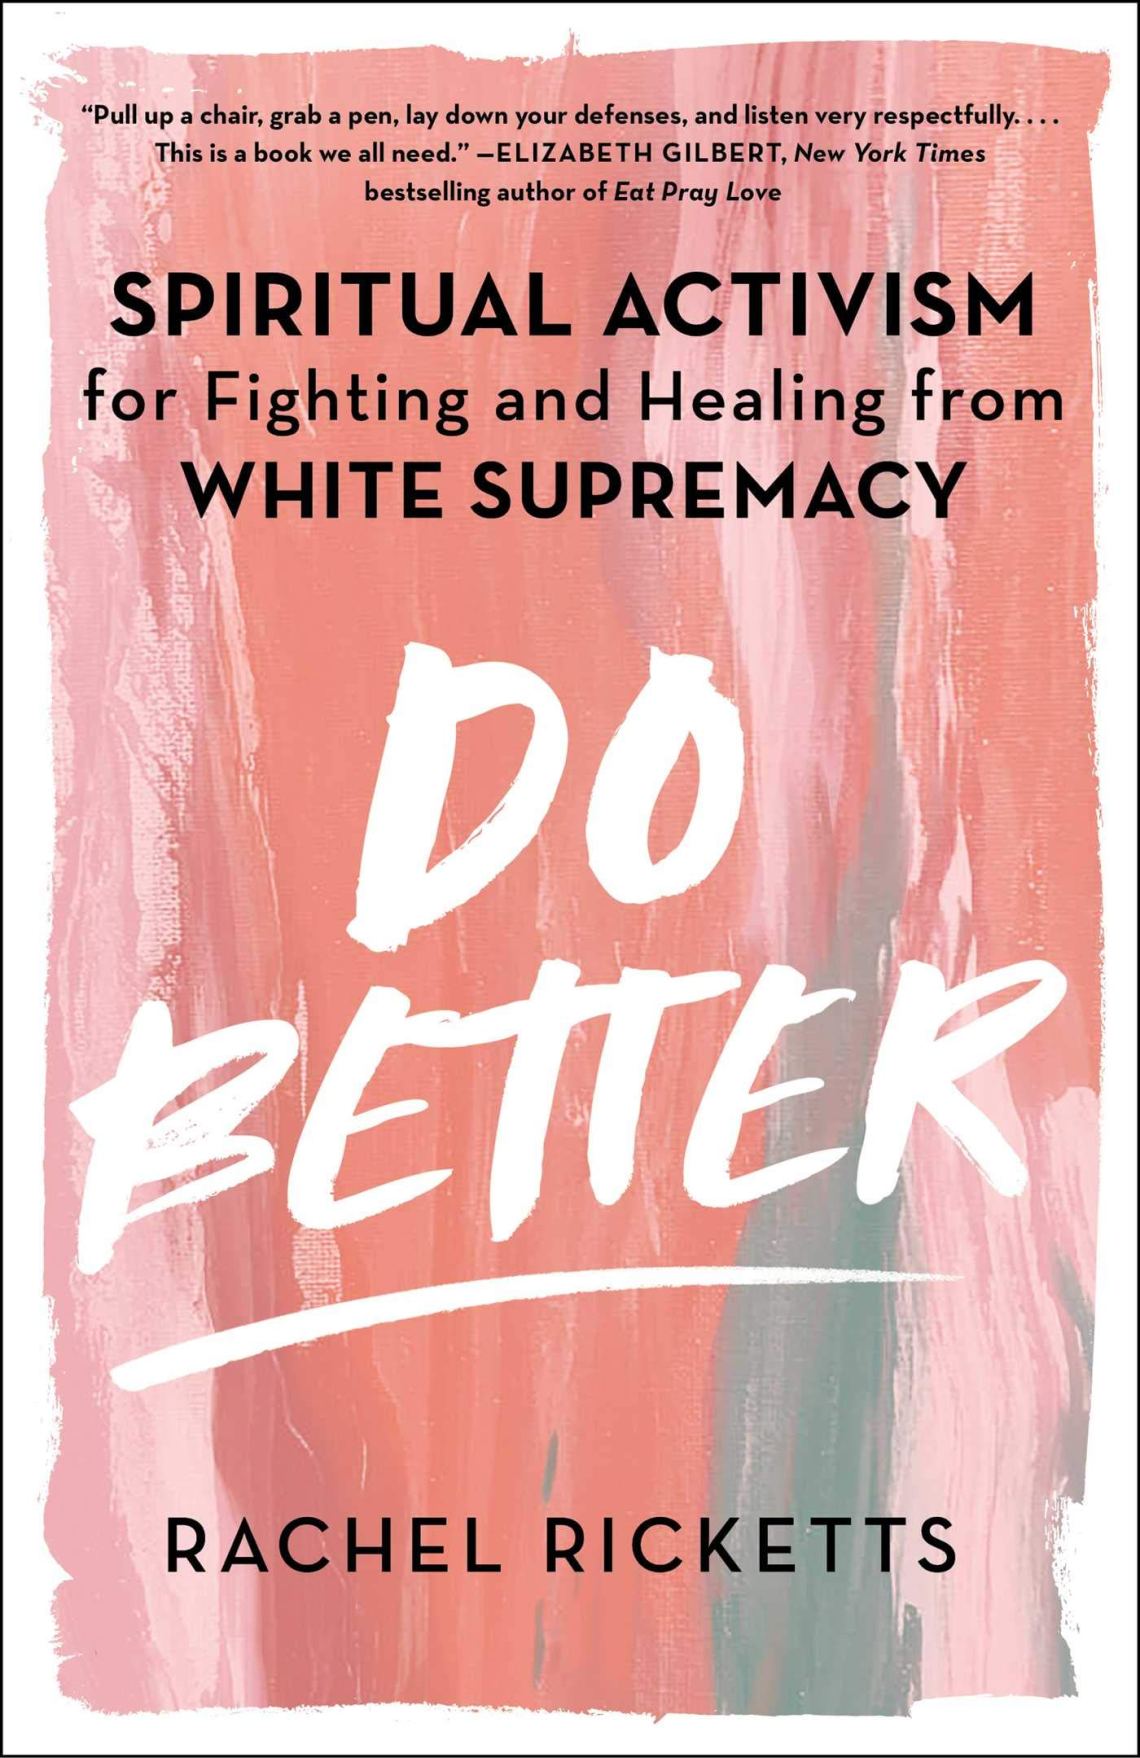 Image of book, Do Better: Spiritual Activism for Fighting and Healing from White Supremacy
by Rachel Rioketts